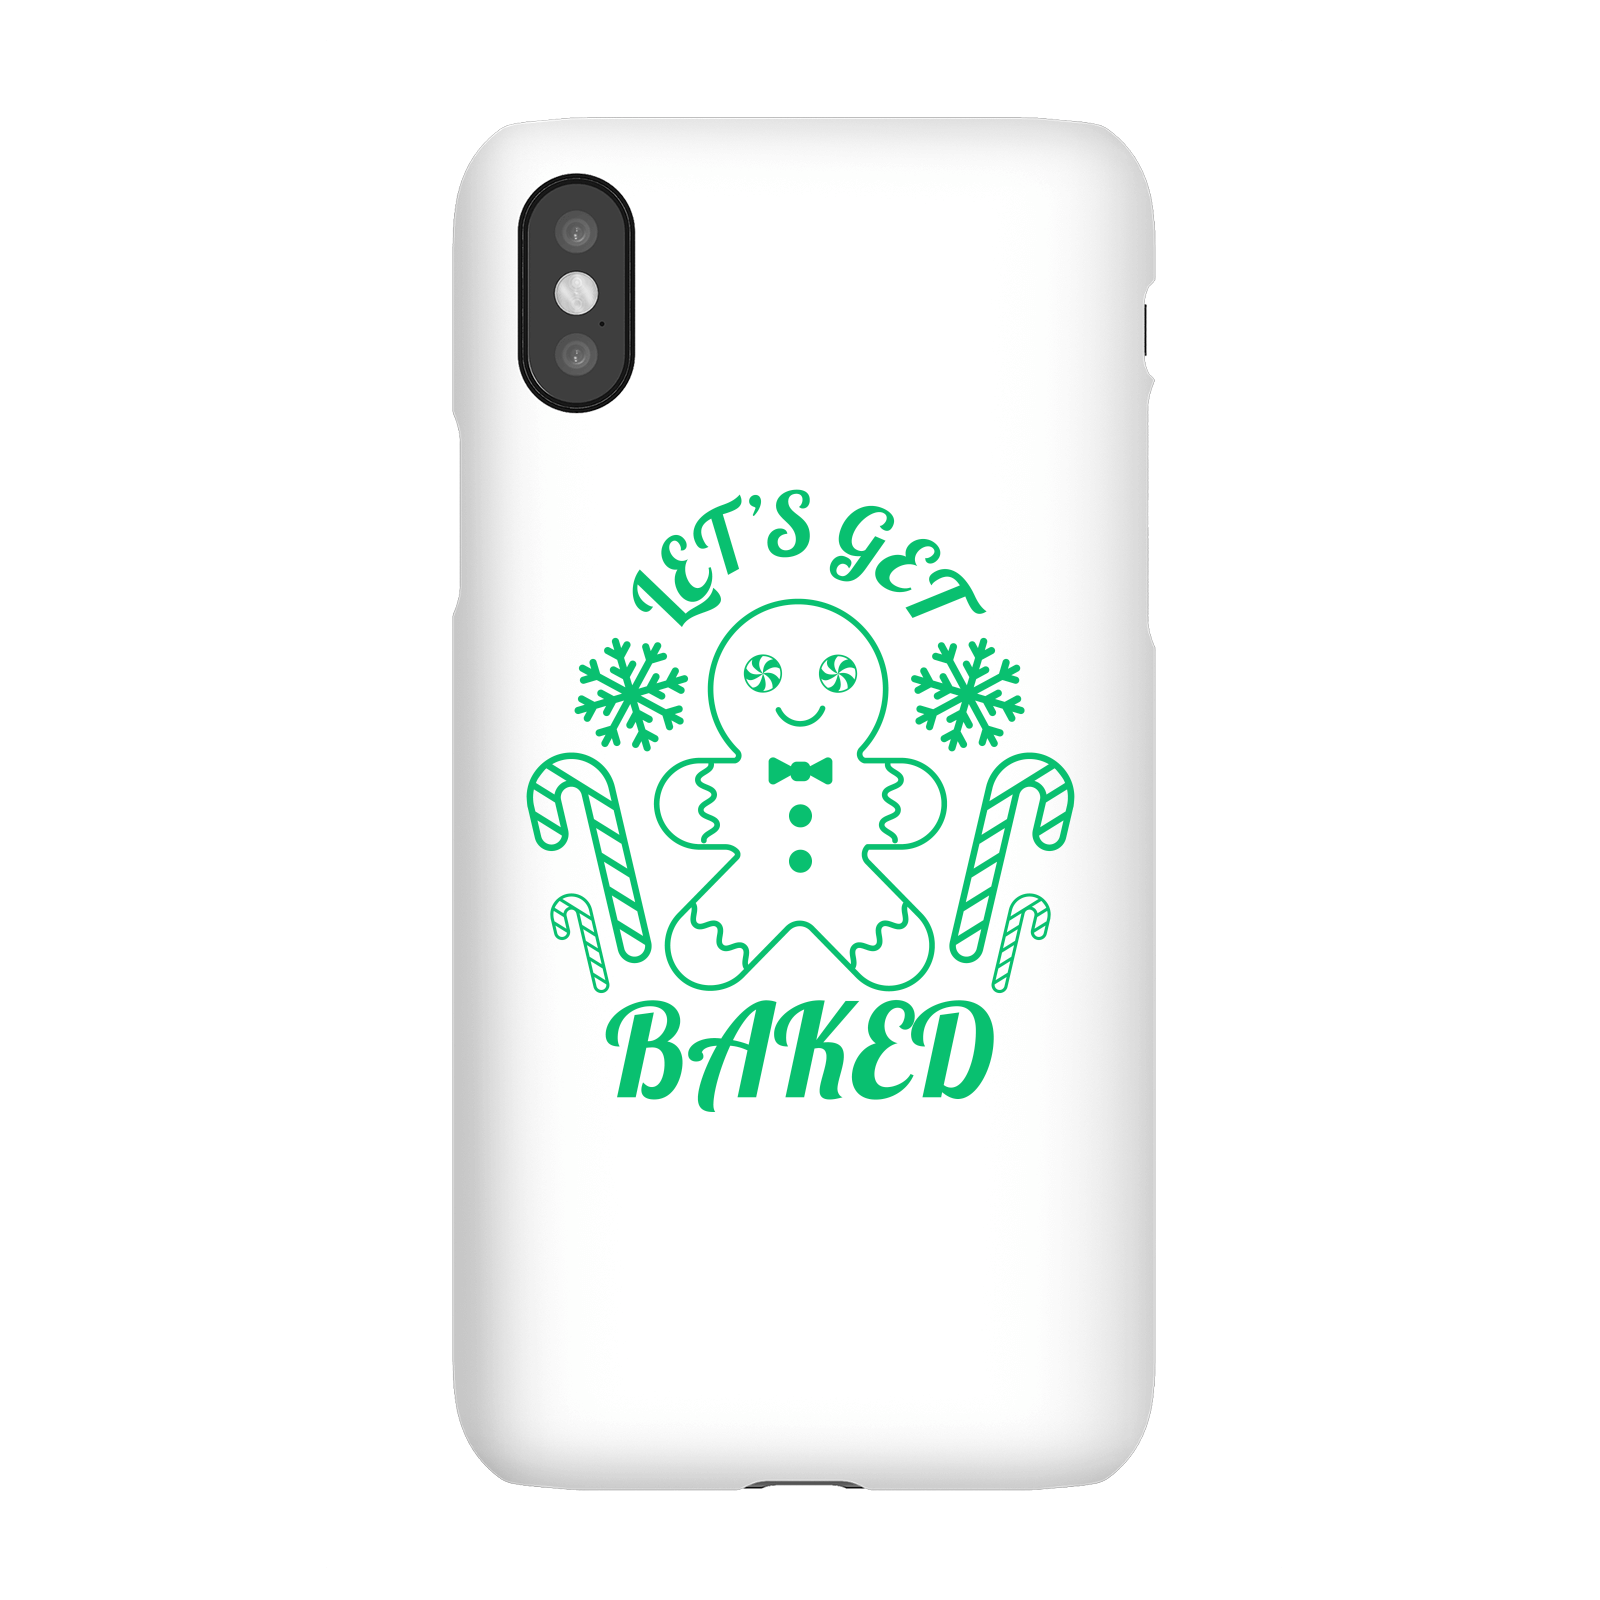 Let's Get Baked Phone Case for iPhone and Android - iPhone 5/5s - Snap Case - Matte